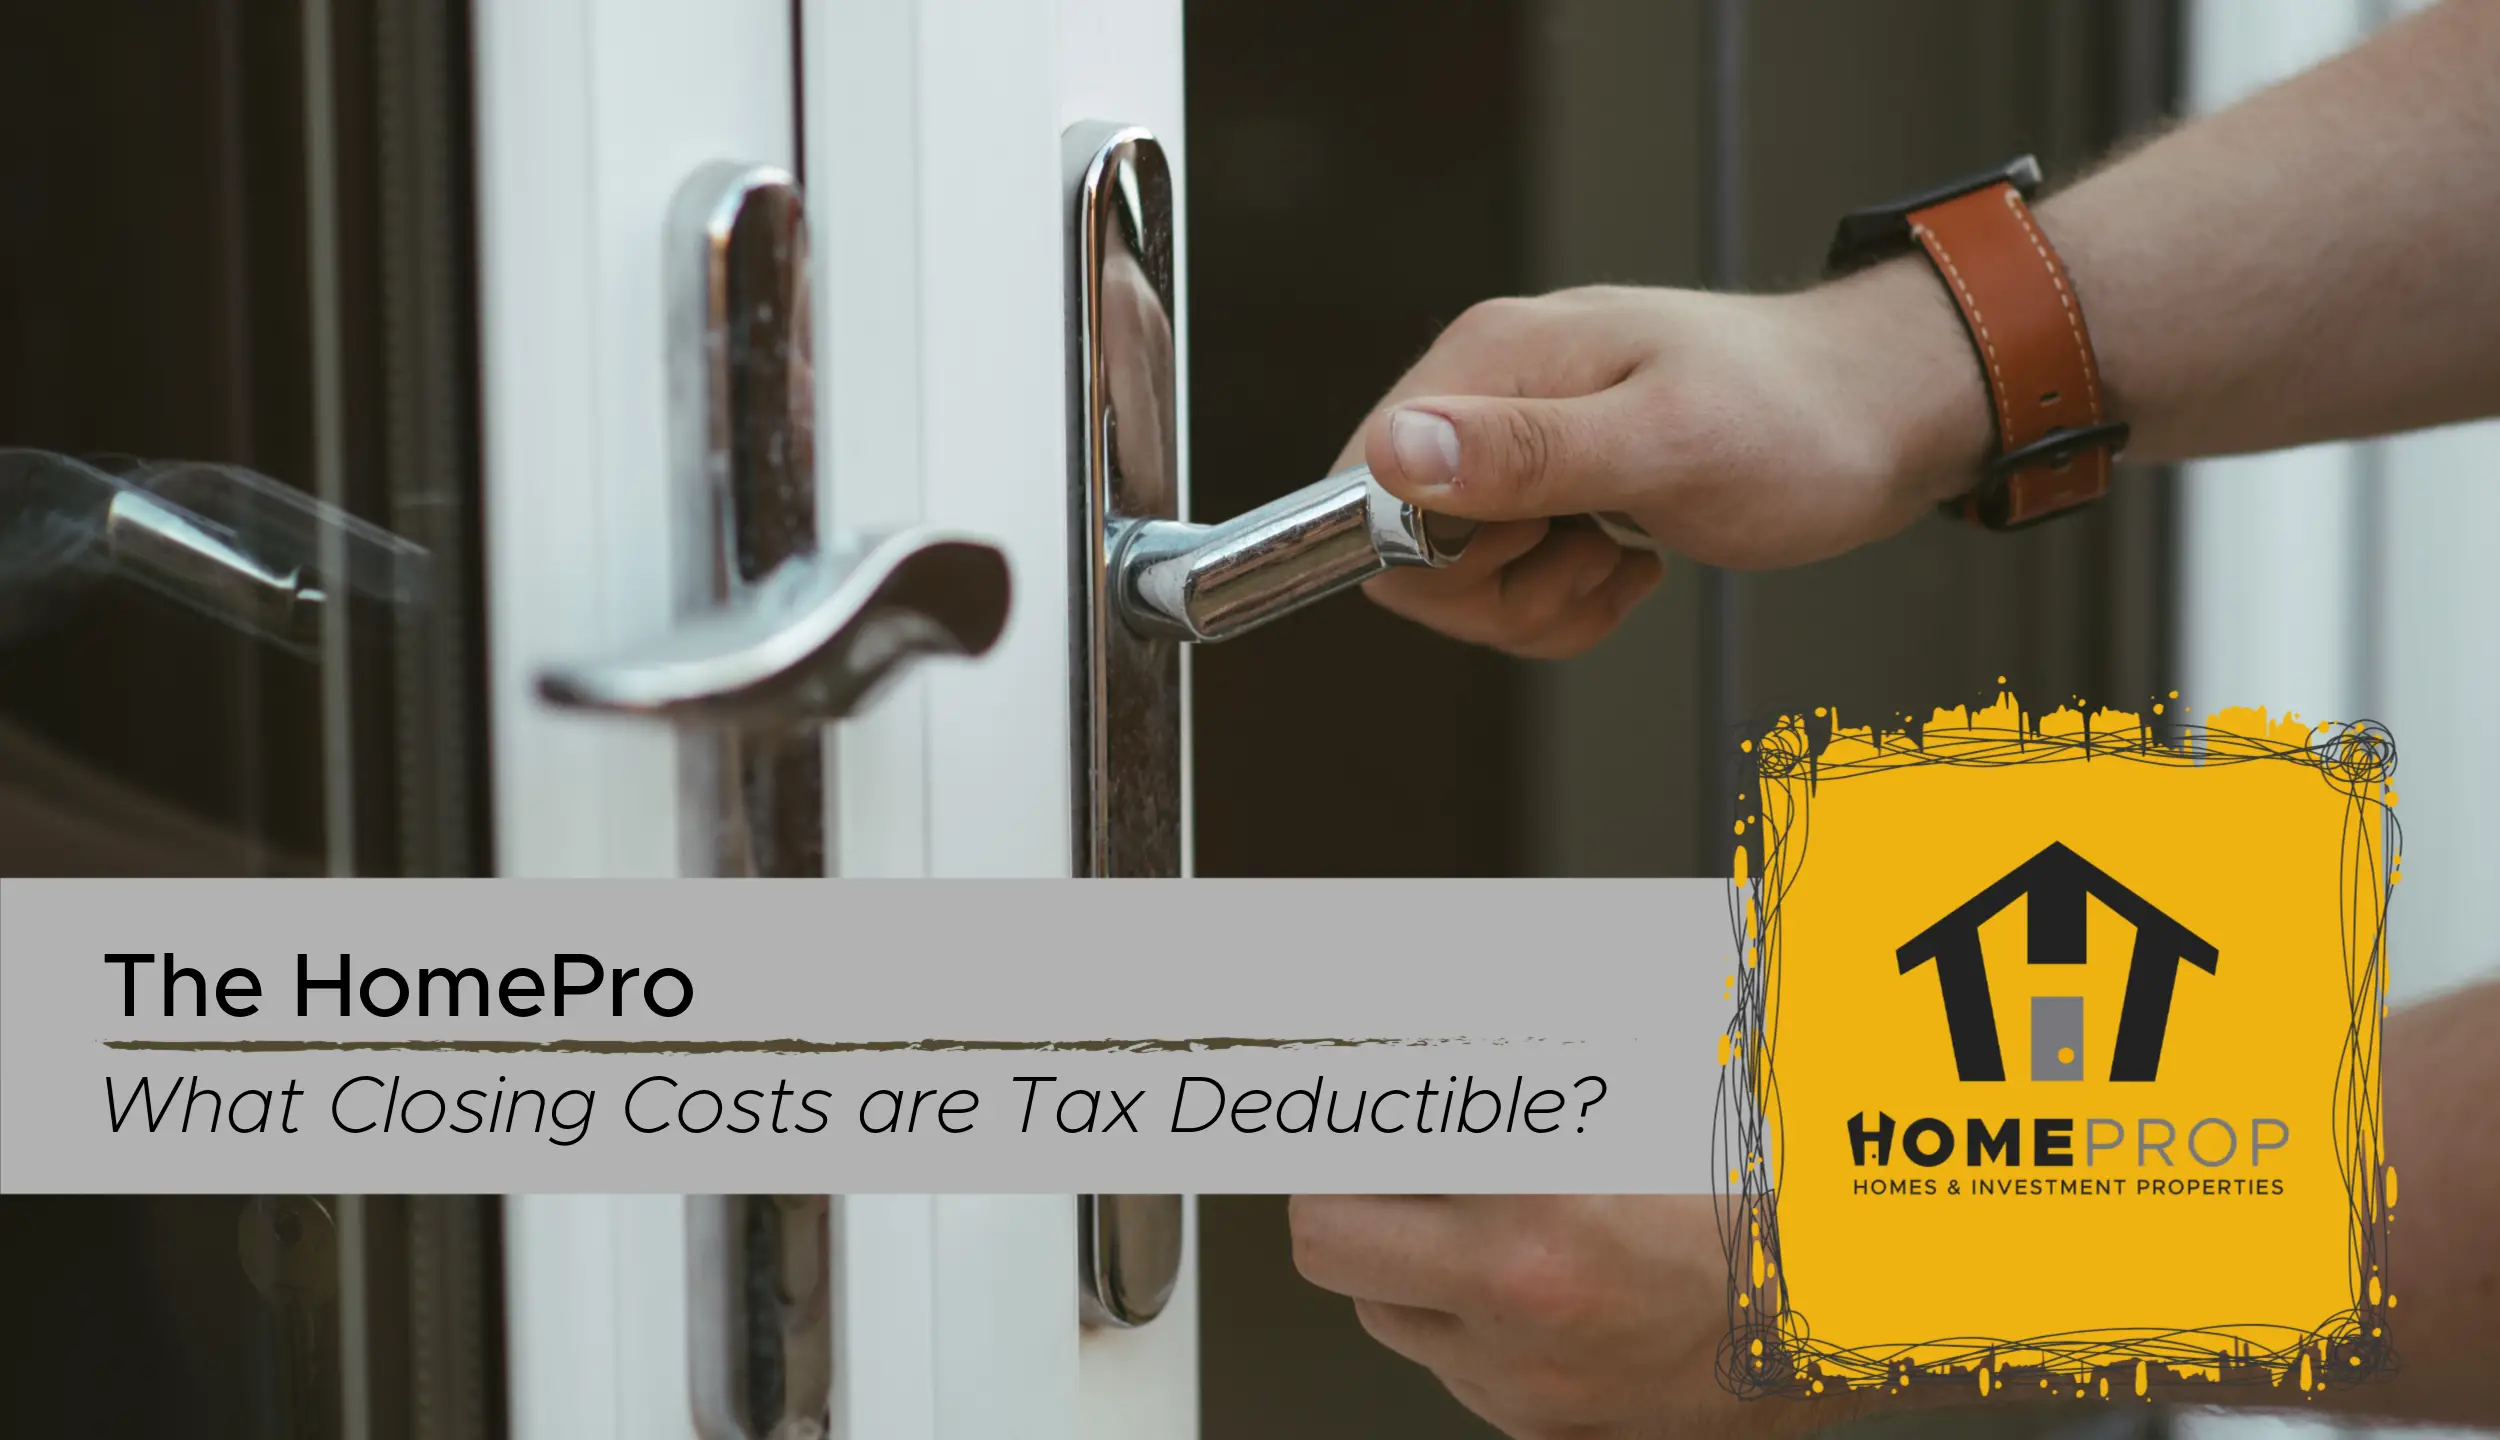 Are Closing Costs Tax Deductible Under the New Tax Law?